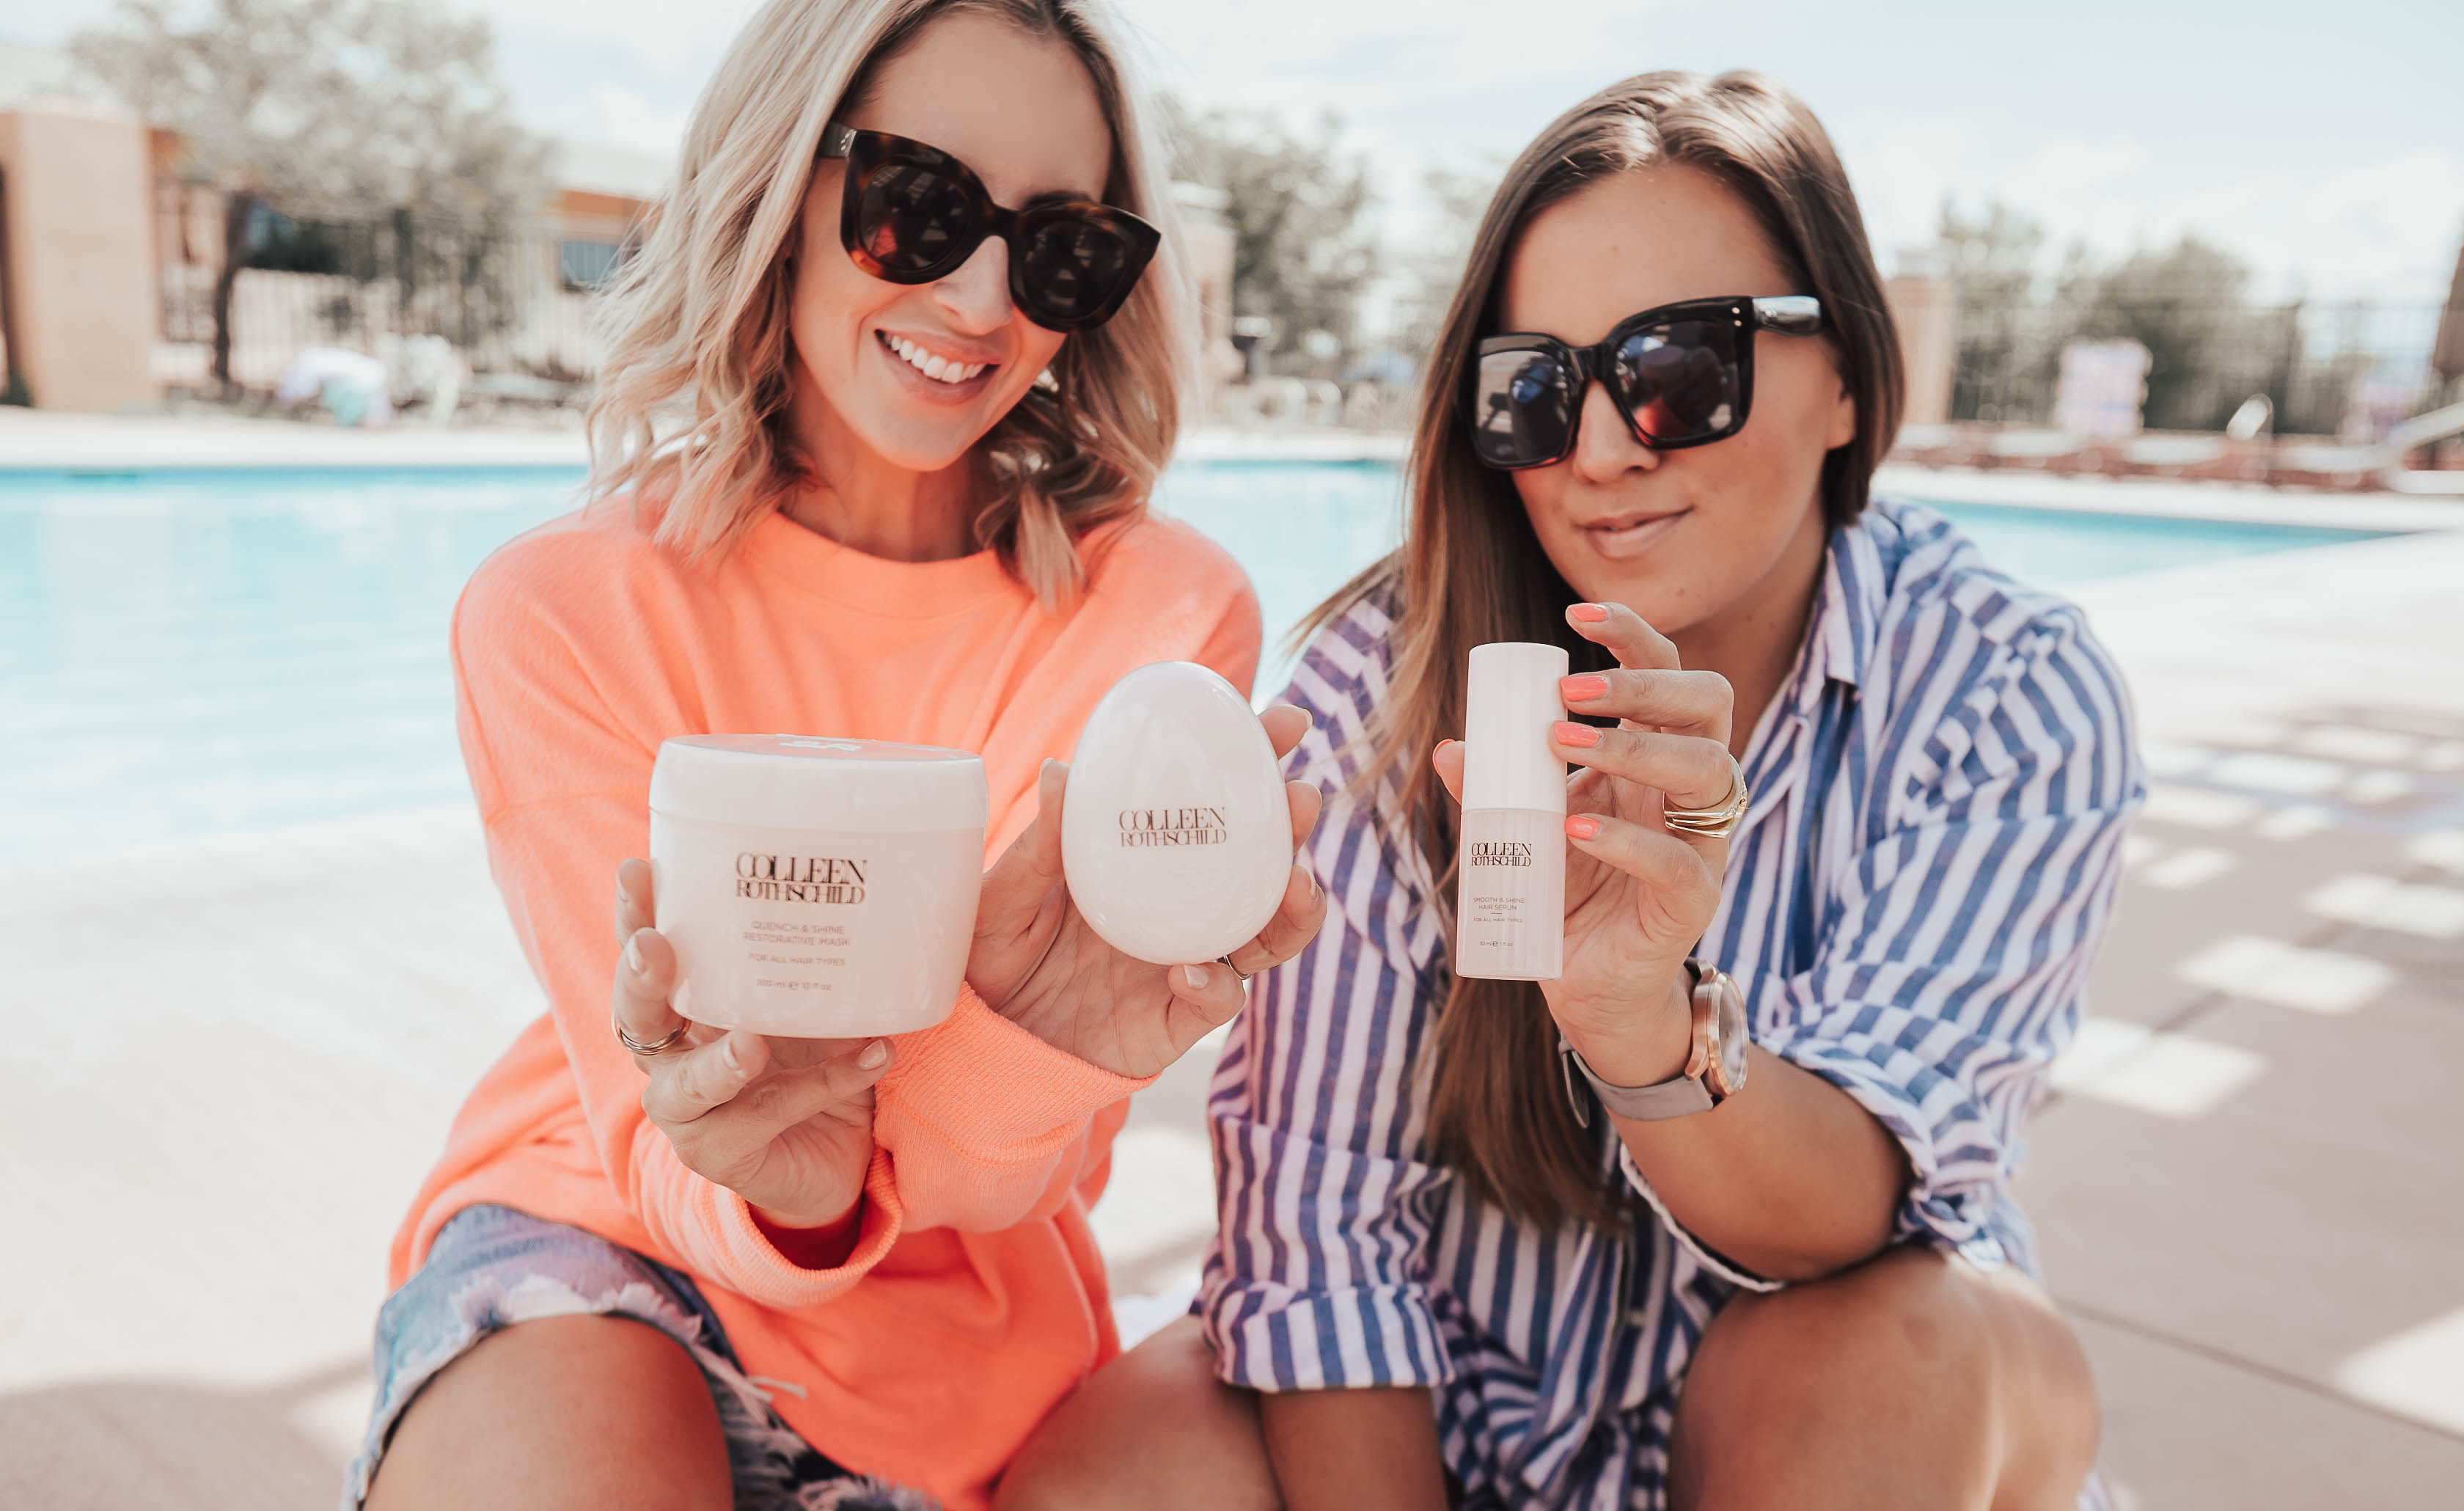 Beauty and Fashion Bloggers, Emily Farren Wieczorek and Ashley Zeal talk about their favorite products for Healthy Summer Hair!